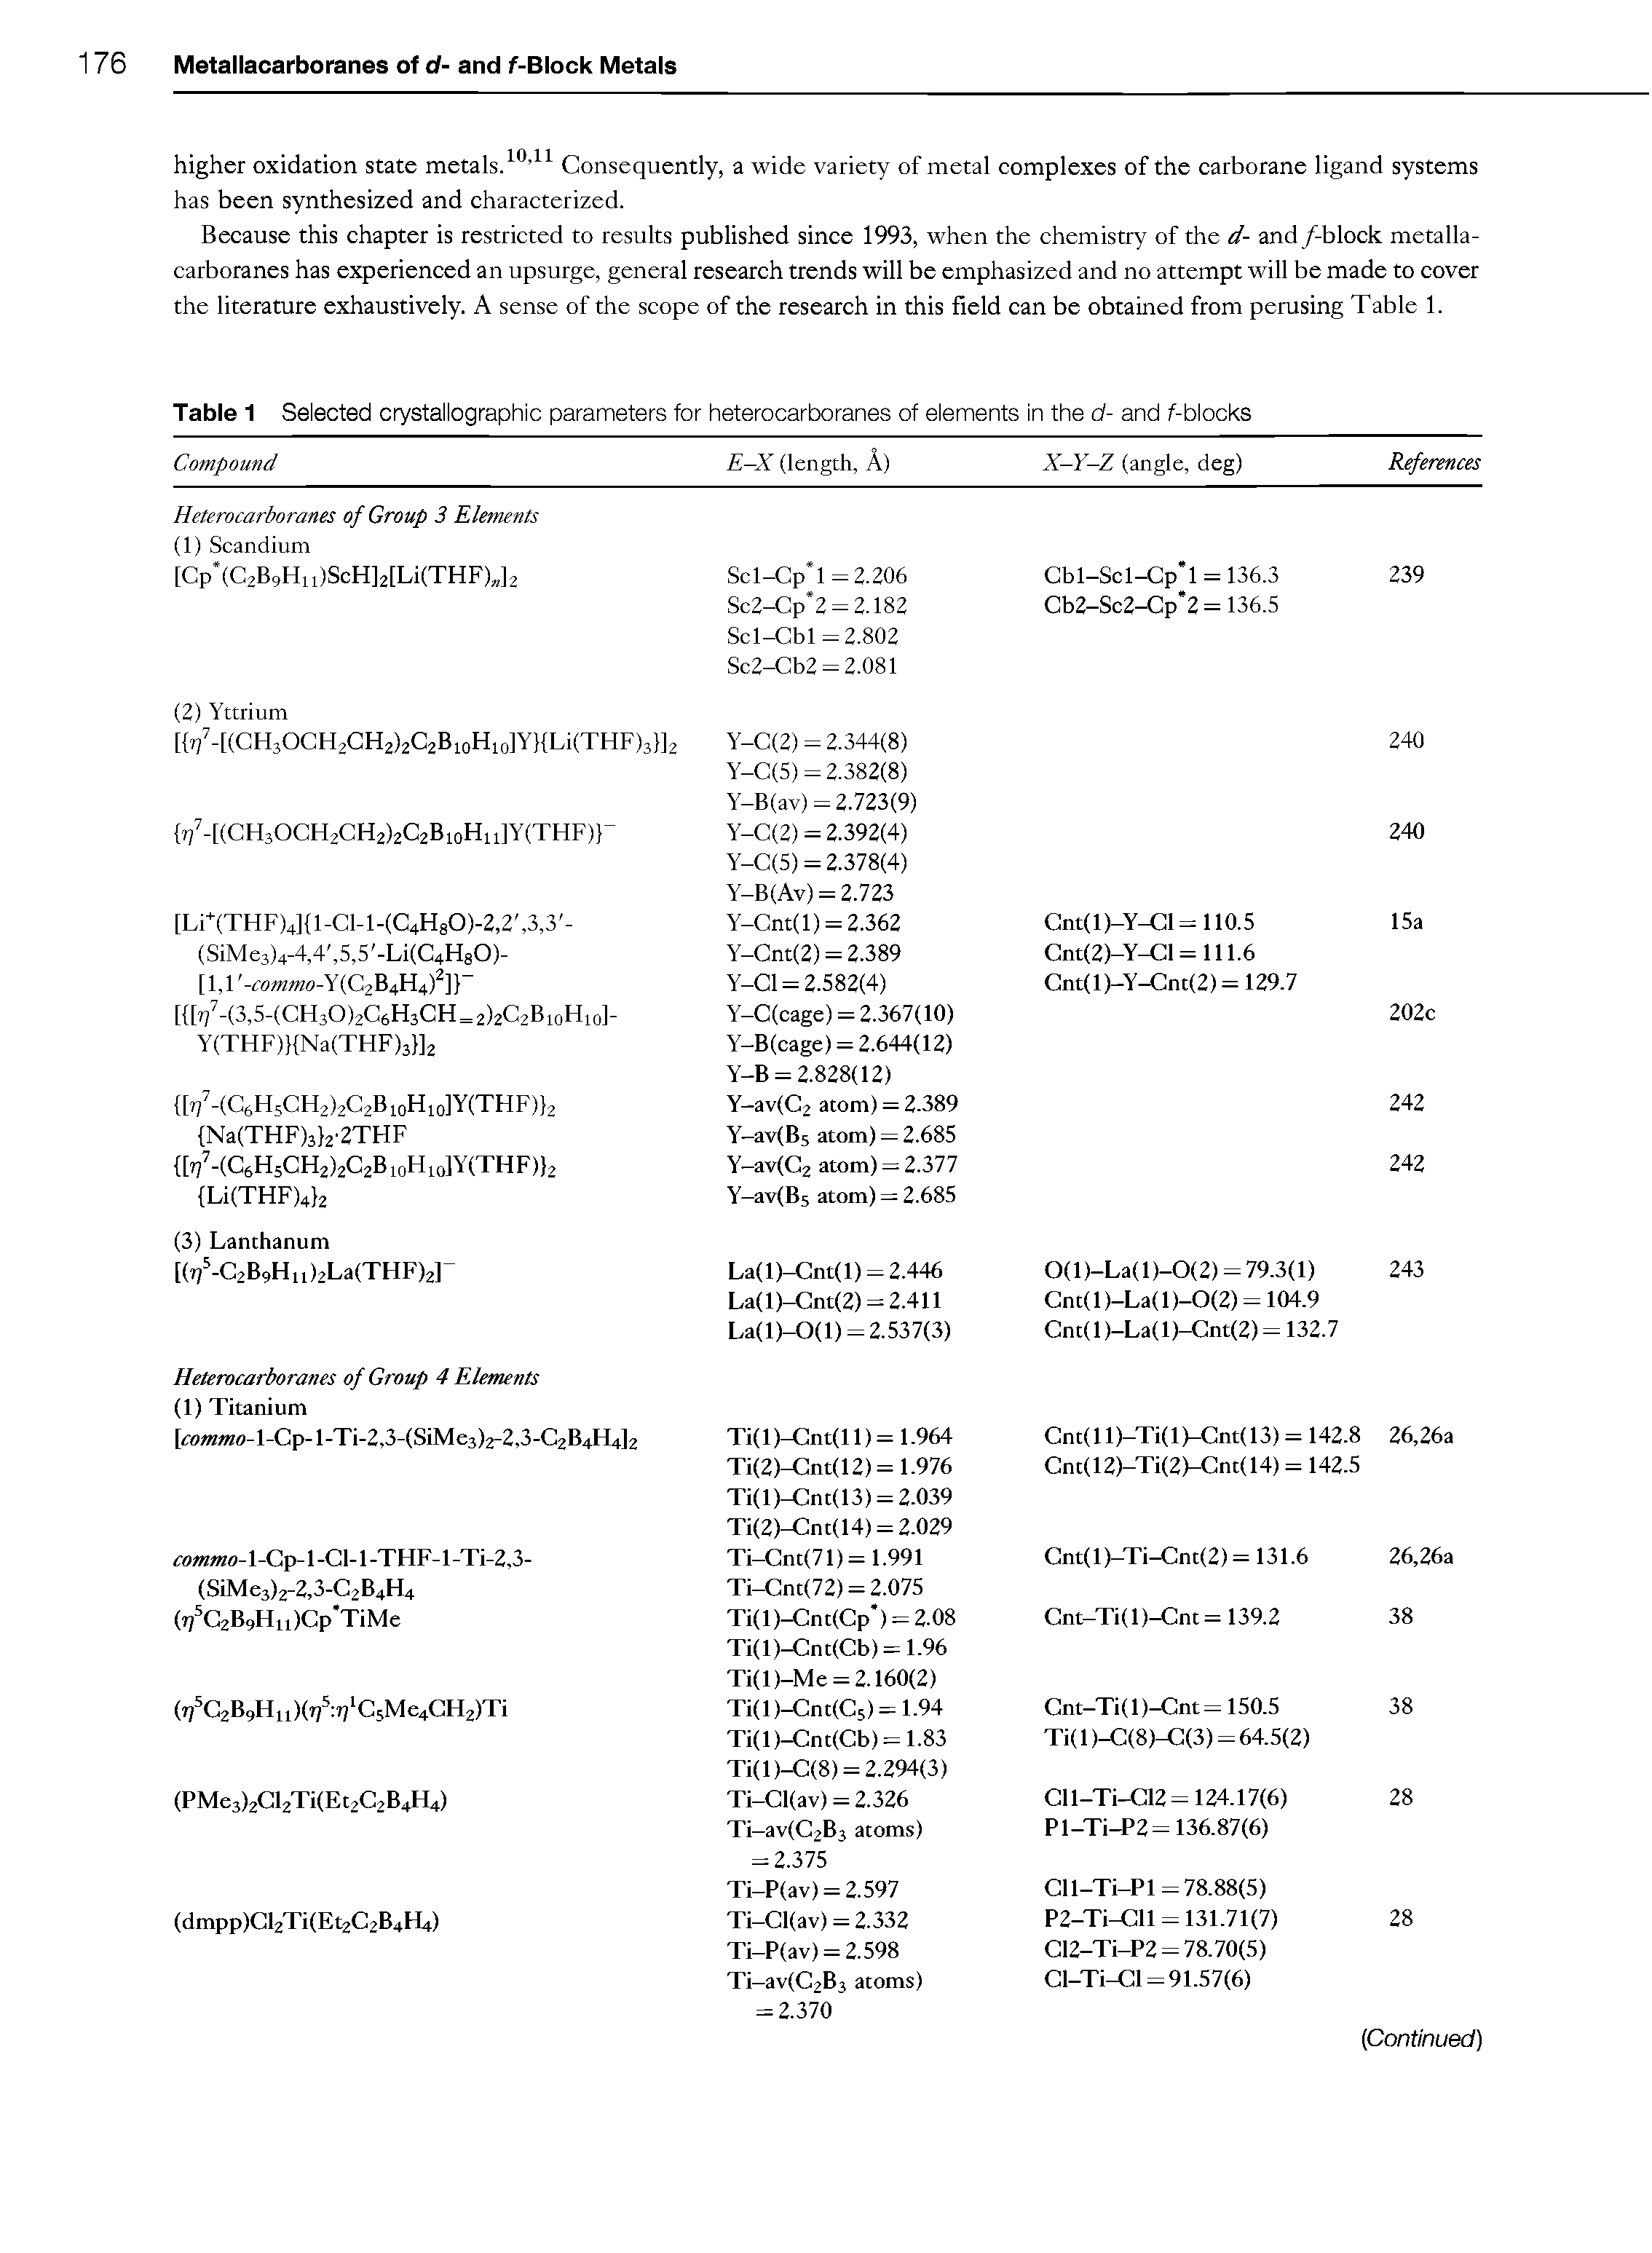 Table 1 Selected crystallographic parameters for heterocarboranes of elements in the d- and /-blocks...